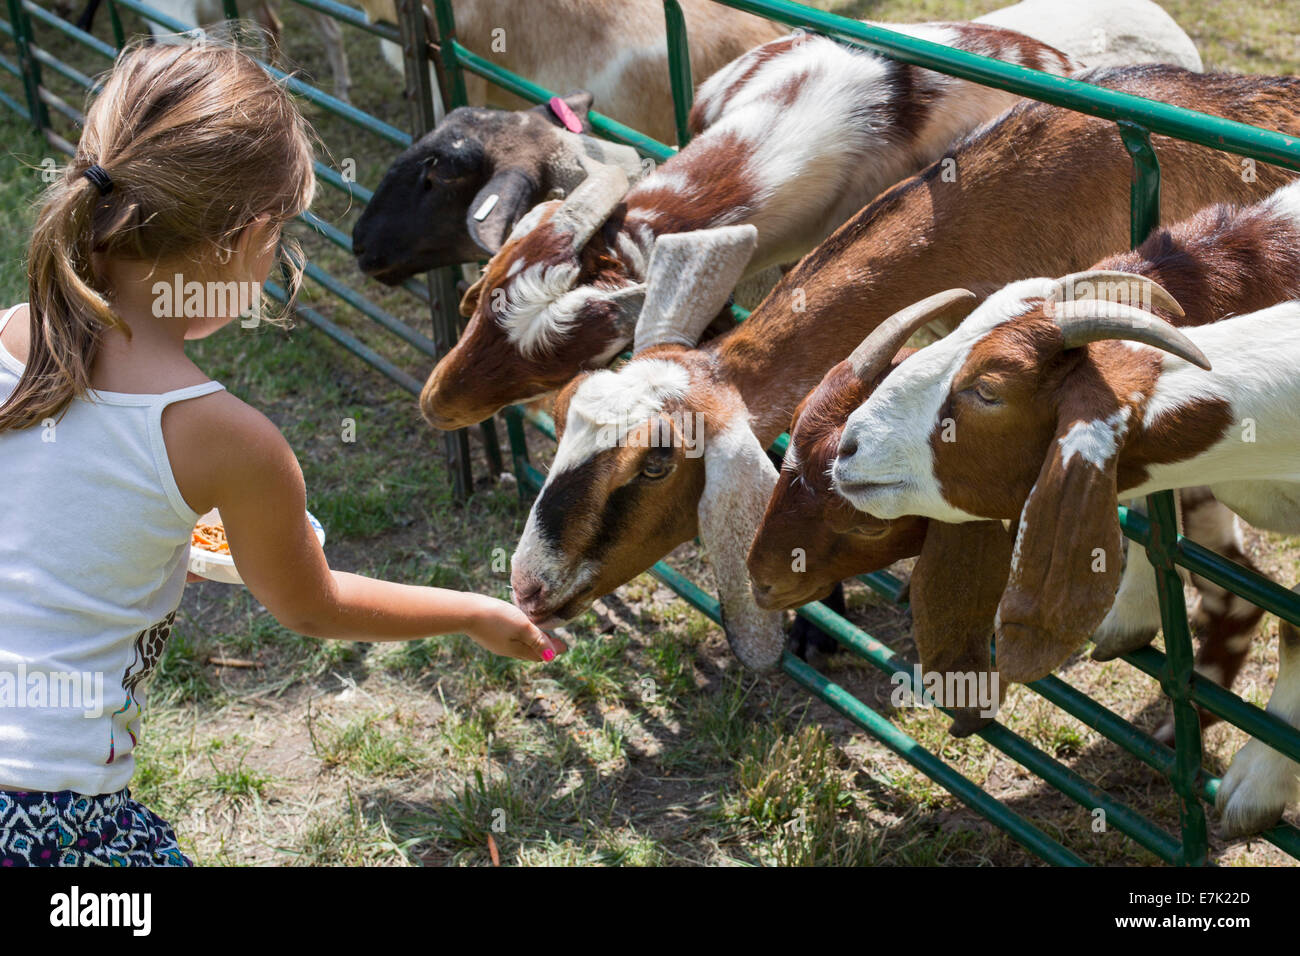 sterling-heights-michigan-children-feed-farm-animals-at-a-petting